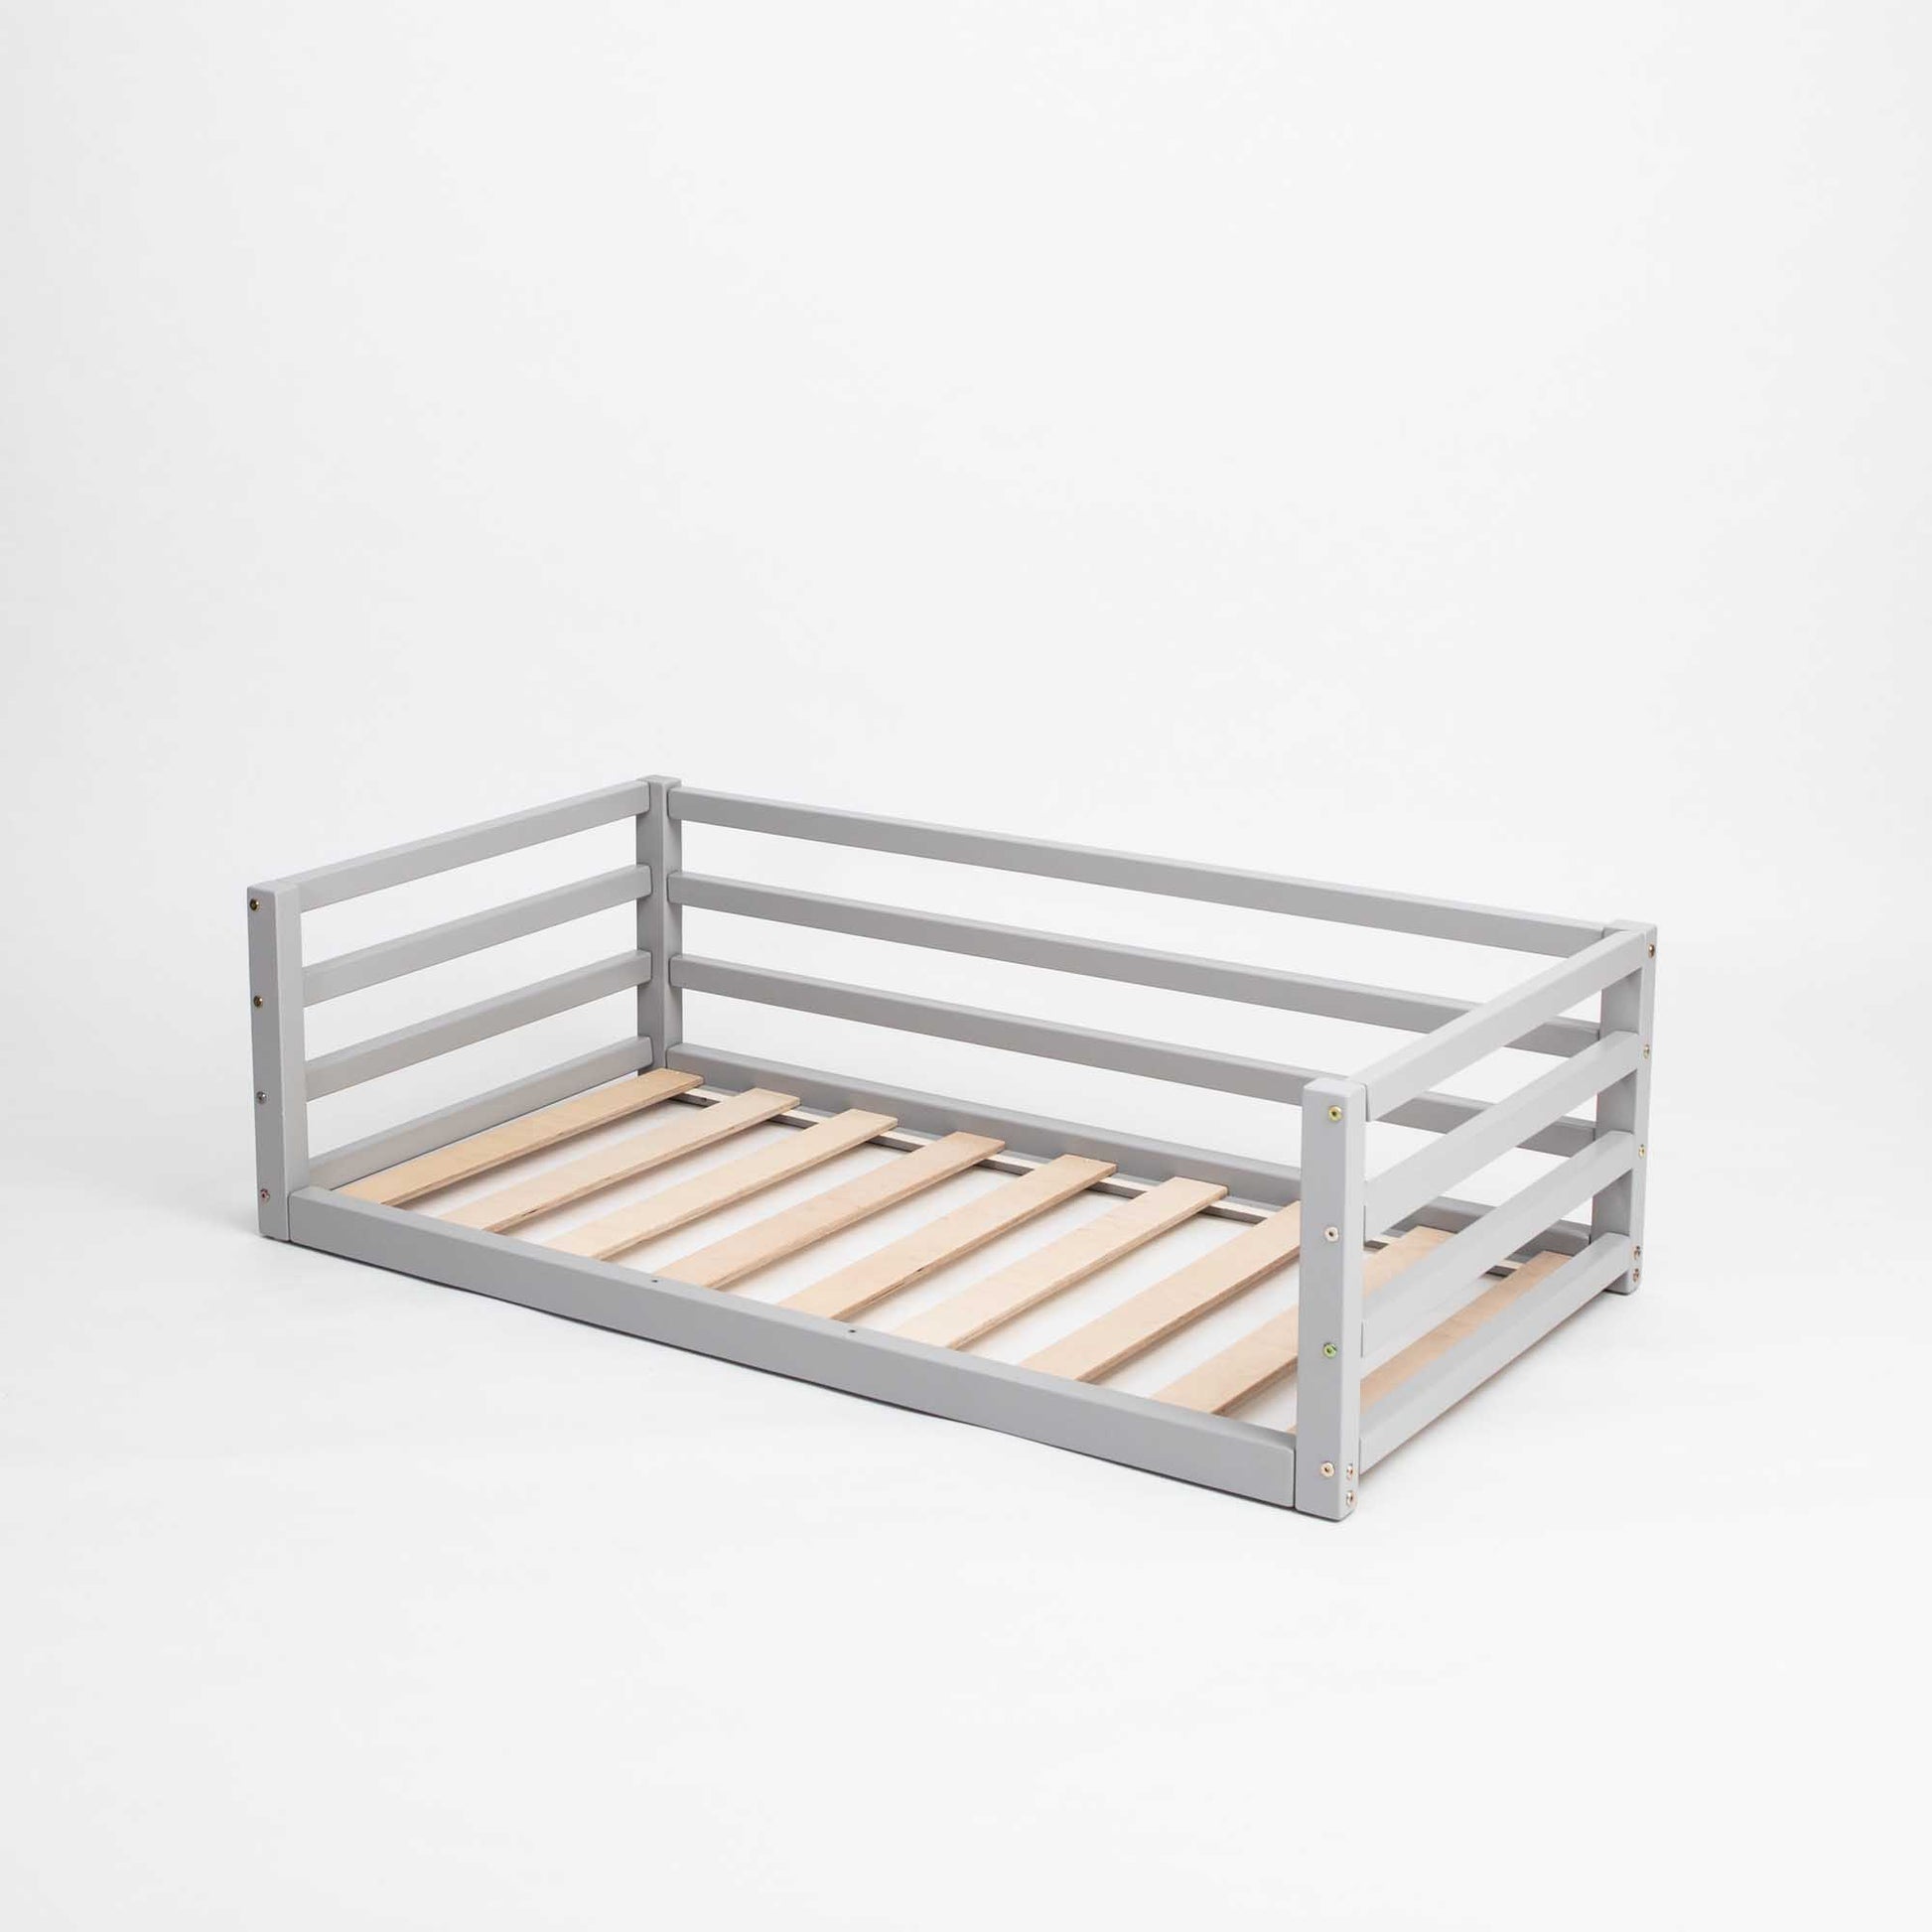 A grey wooden Sweet Home From Wood transitional toddler bed with wooden slats and a Children's floor level bed with 3-sided safety rail for children.